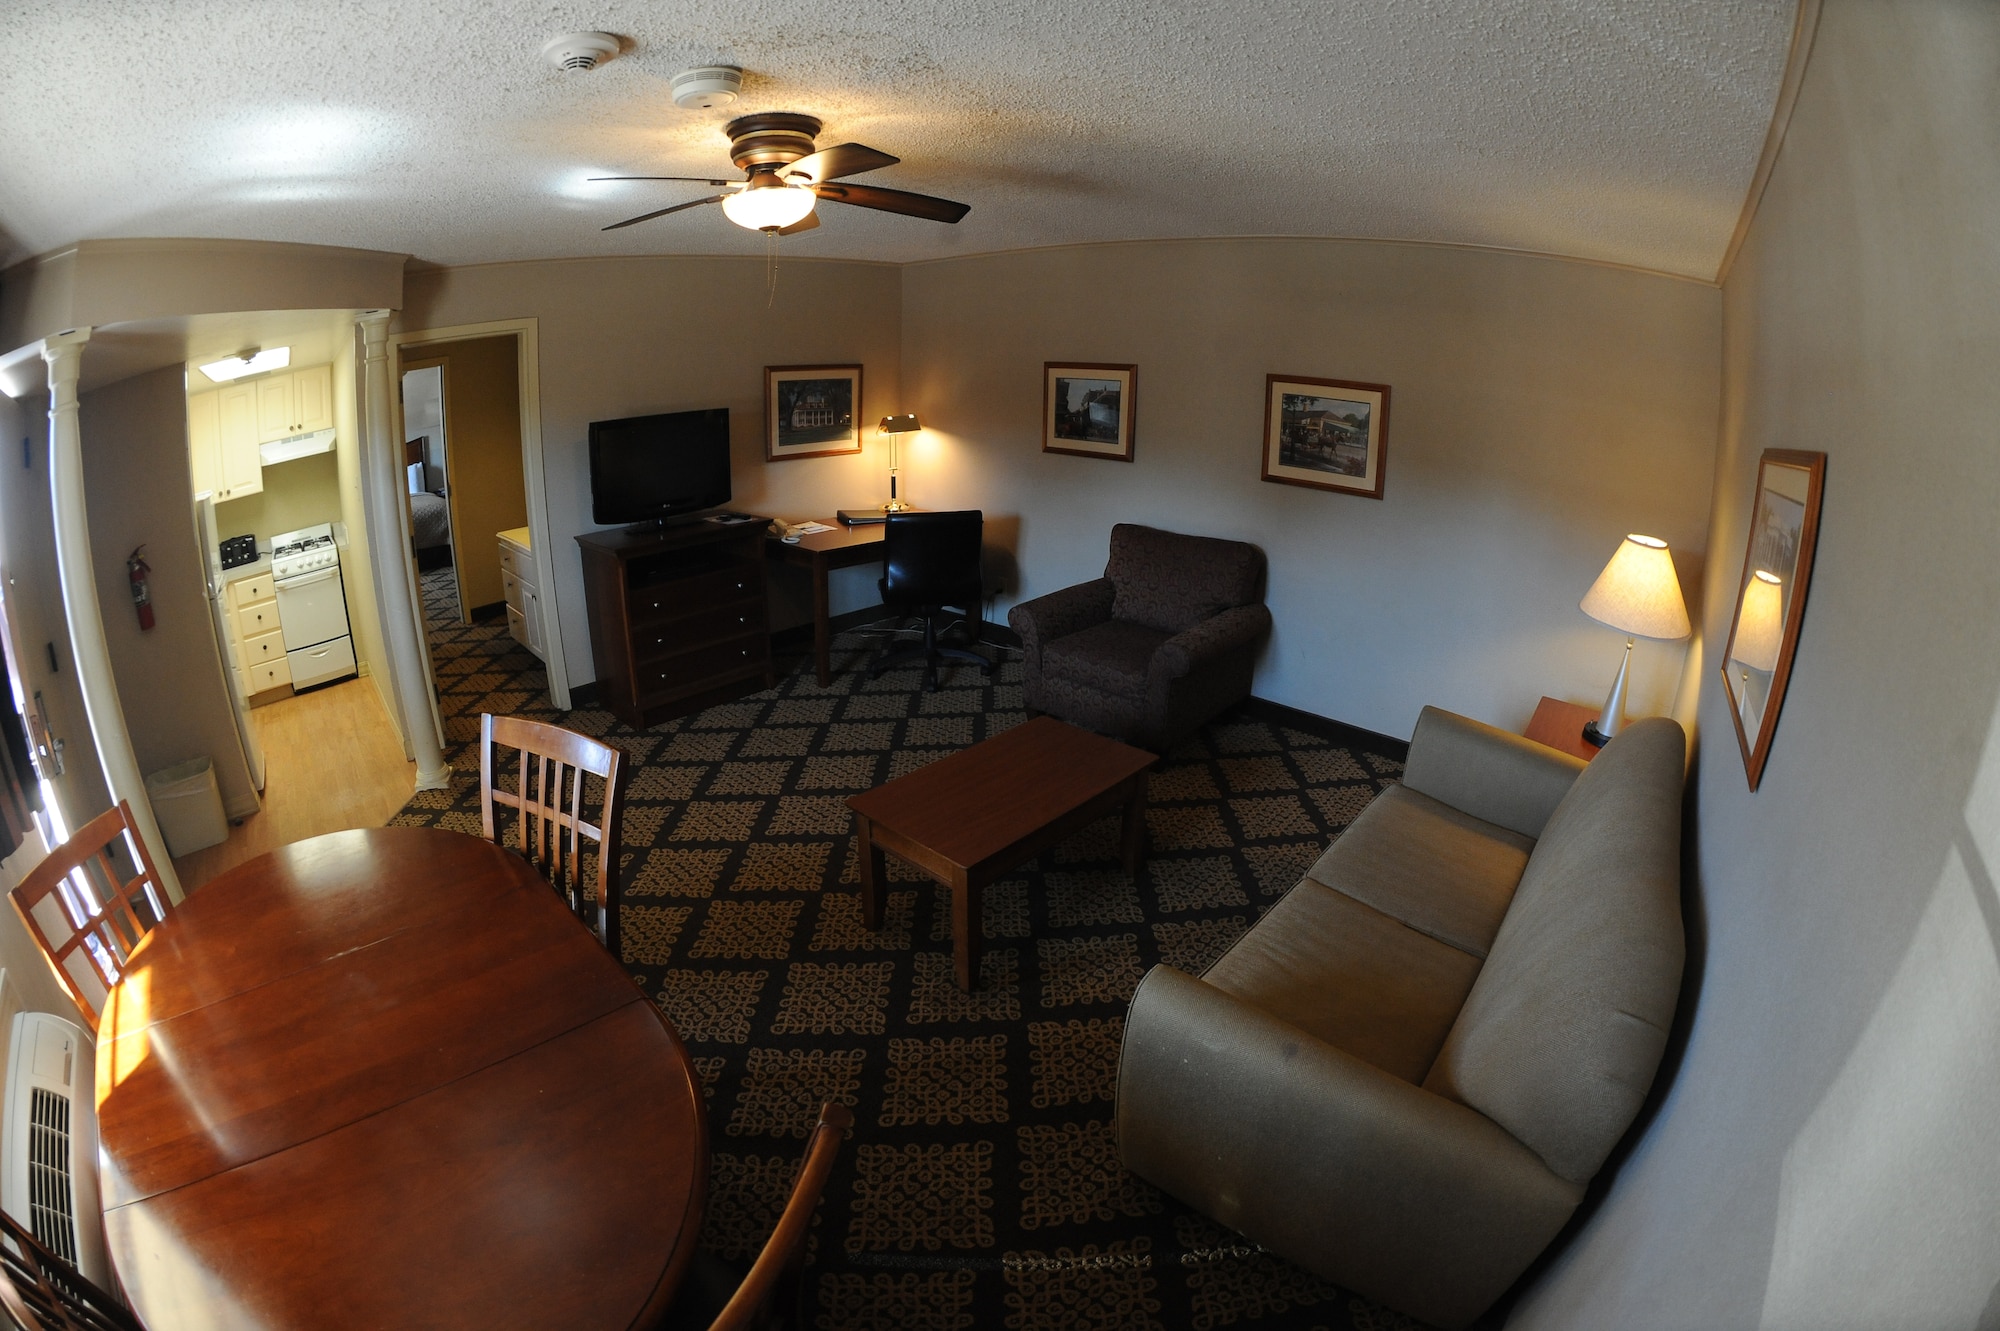 Military members, retirees, dependents and civilians are all welcome to stay at the Barksdale Inn. For military members needing lodging for an extended period of time, the inn offers rooms that come equipped with a full kitchen. (U.S. Air Force photo/Senior Airman Micaiah Anthony)(RELEASED)